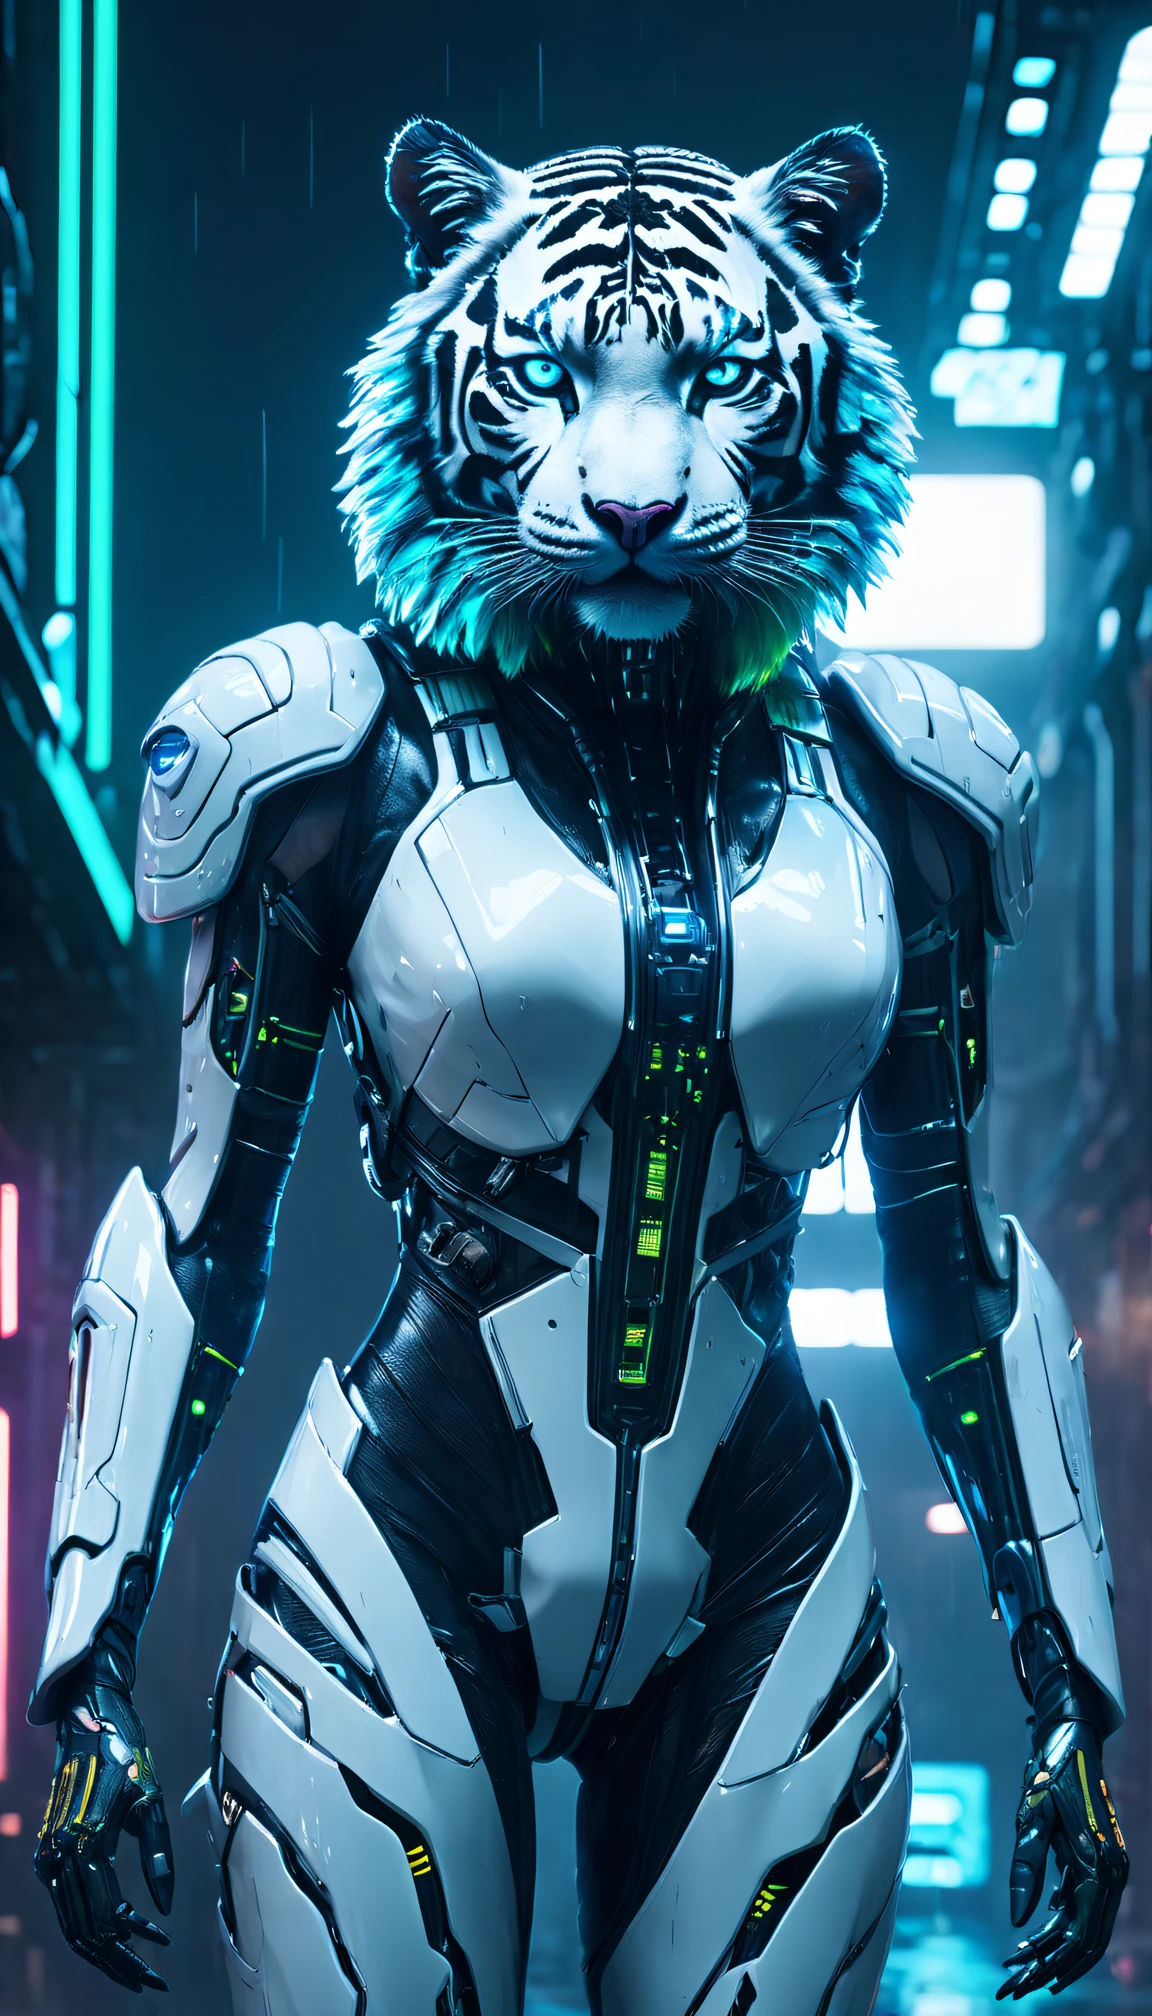 （Best quality，4K，8K，Tall structures，tmasterpiece：1.2），hyper-detailing，（realistically，photoreali，photoreali：1.37），cyber punk personage，White tiger and human hybrid，neonlight，dark and gritty atmosphere，Luminous implants，Sci-fi fashion，Reflective surfaces，Heavy rain and fog，Substantially modified body parts，Electric blue and neon green color scheme、cybernetically enhanced、Seamless fusion of human and animal characteristics，Amazing stature and feline agility，sparks flying，Technological progress，Impressive warping and marking，Snorkel and oxygen mask，criminal gang&#39;secret underground lab，Contrast of natural and man-made elements，Technology implants blend seamlessly into the body，sharp claws and teeth，Metal and chrome trim，Corroded and rusted structures，Digital display failure，Persistent sense of danger and uneasiness。